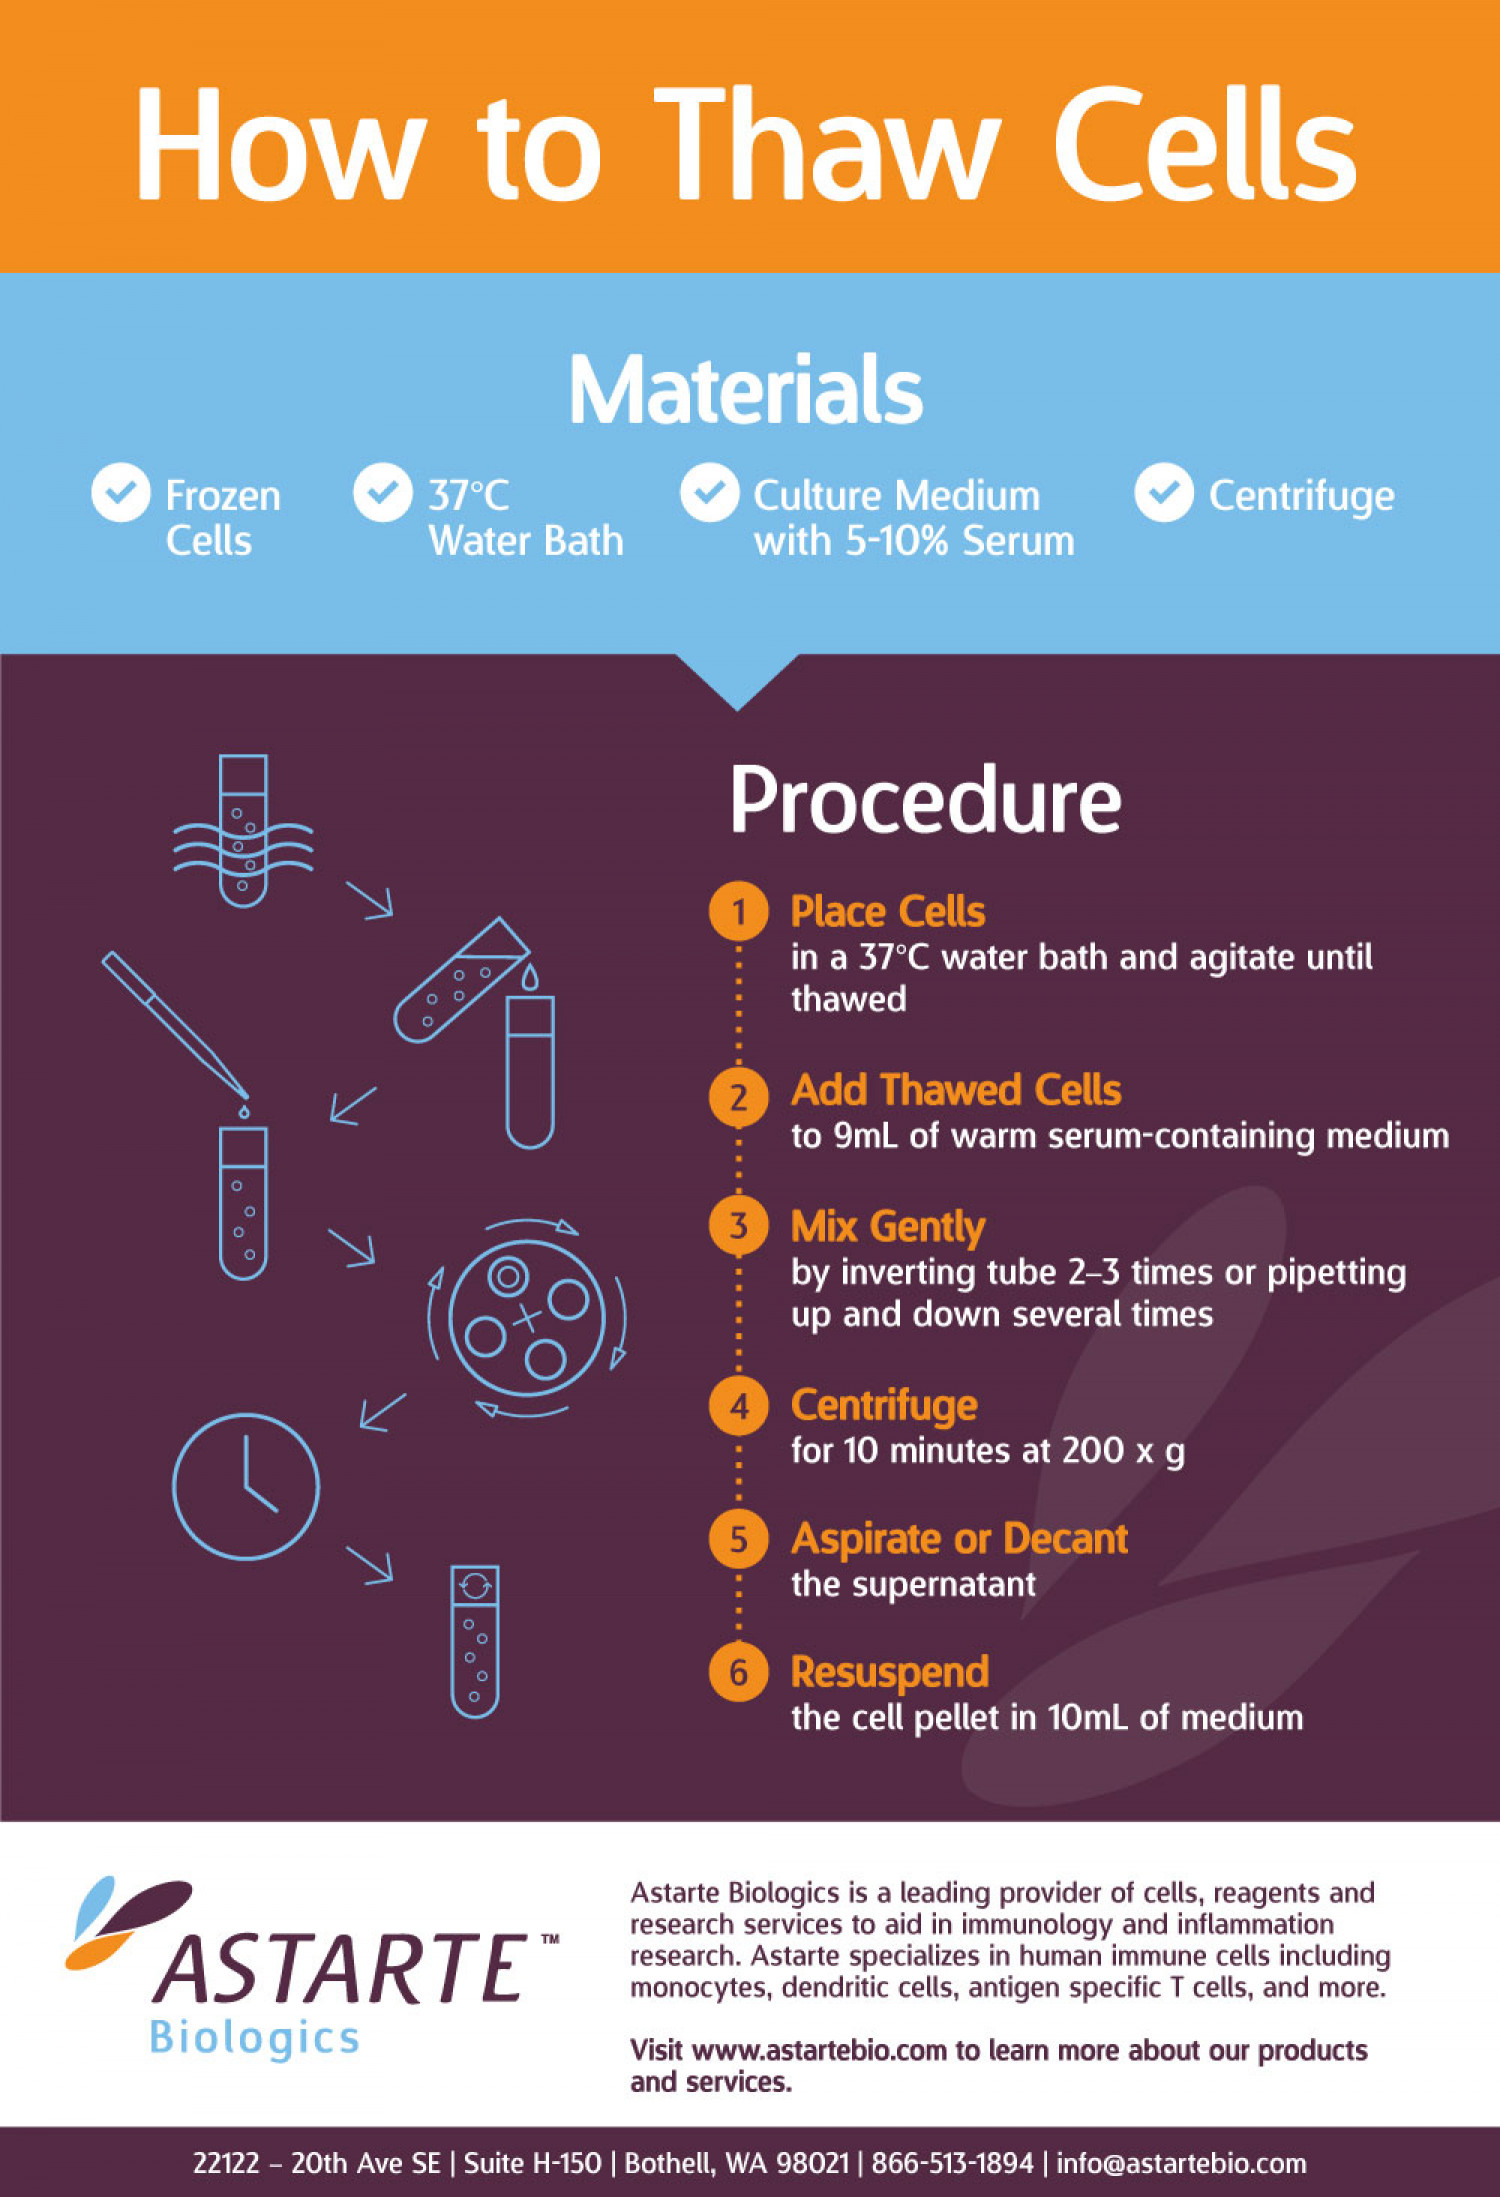 How to Thaw Immune Cells for Research Infographic